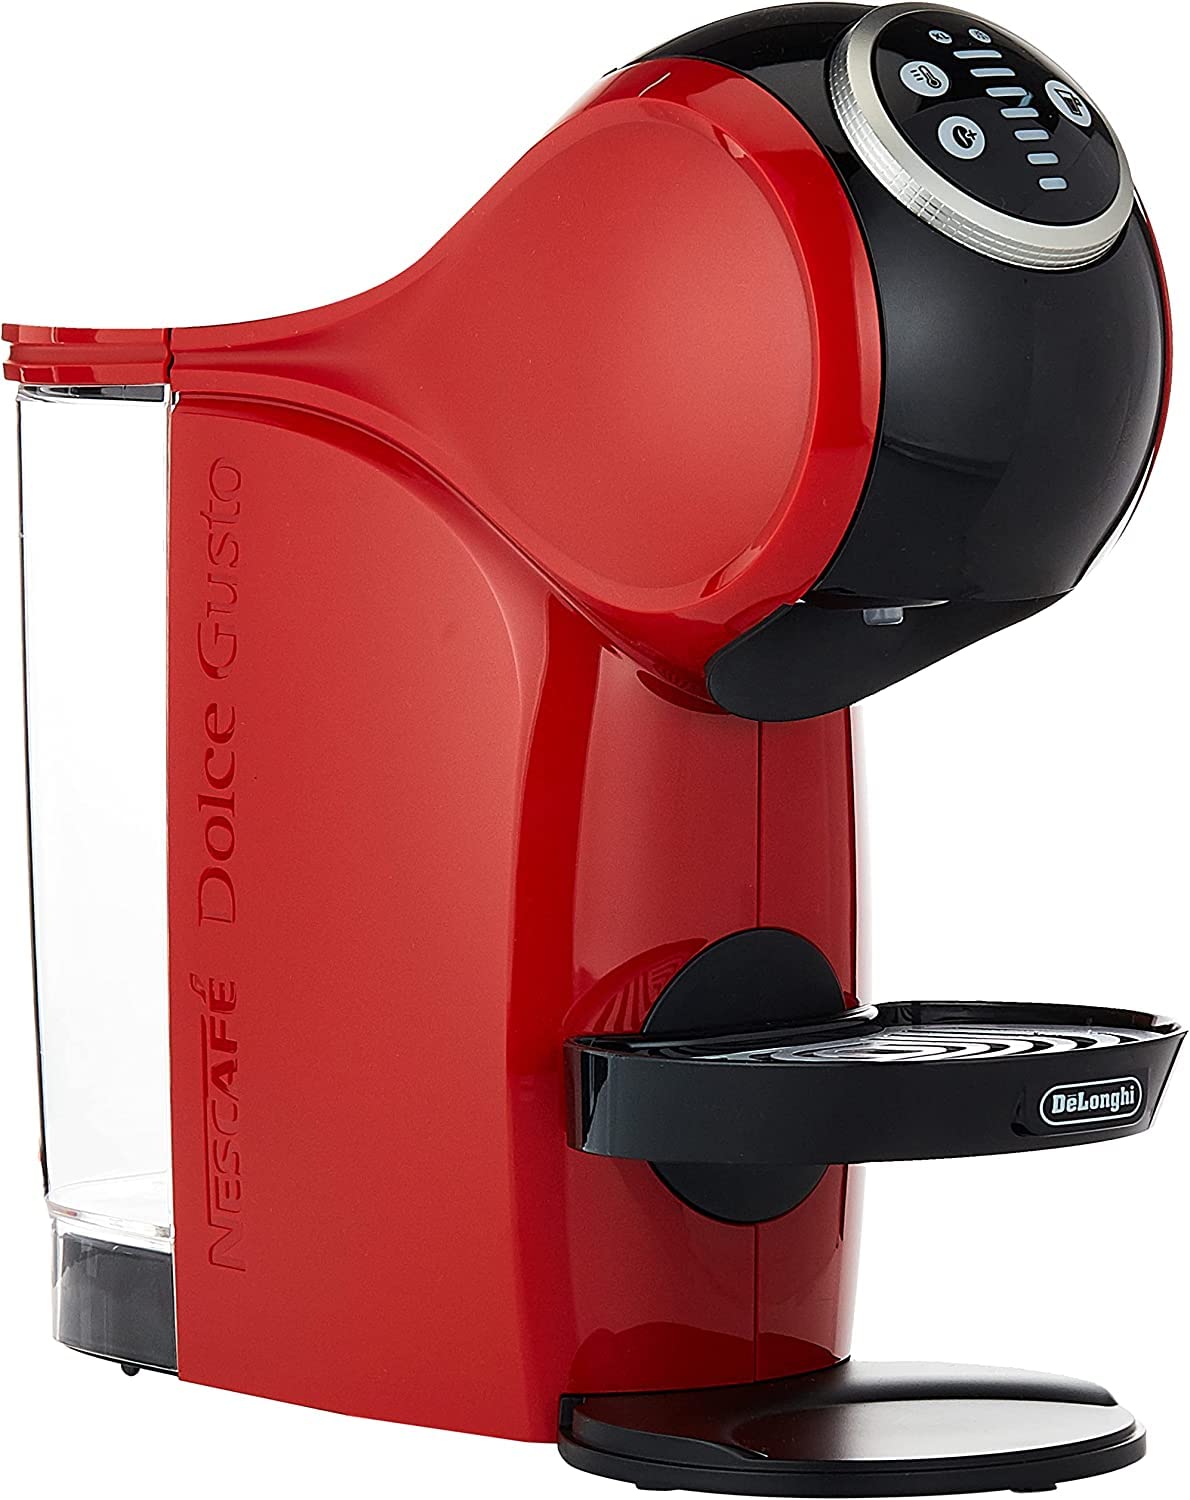 Nescafe Dolce Gusto by De'Longhi GENIO S PLUS Automatic Capsule Coffee Machine with Compact & Powerful up to 15 Bar Pressure, Cappuccino, Tea, Hot Chocolate & Espresso Coffee Maker EDG315.R Red